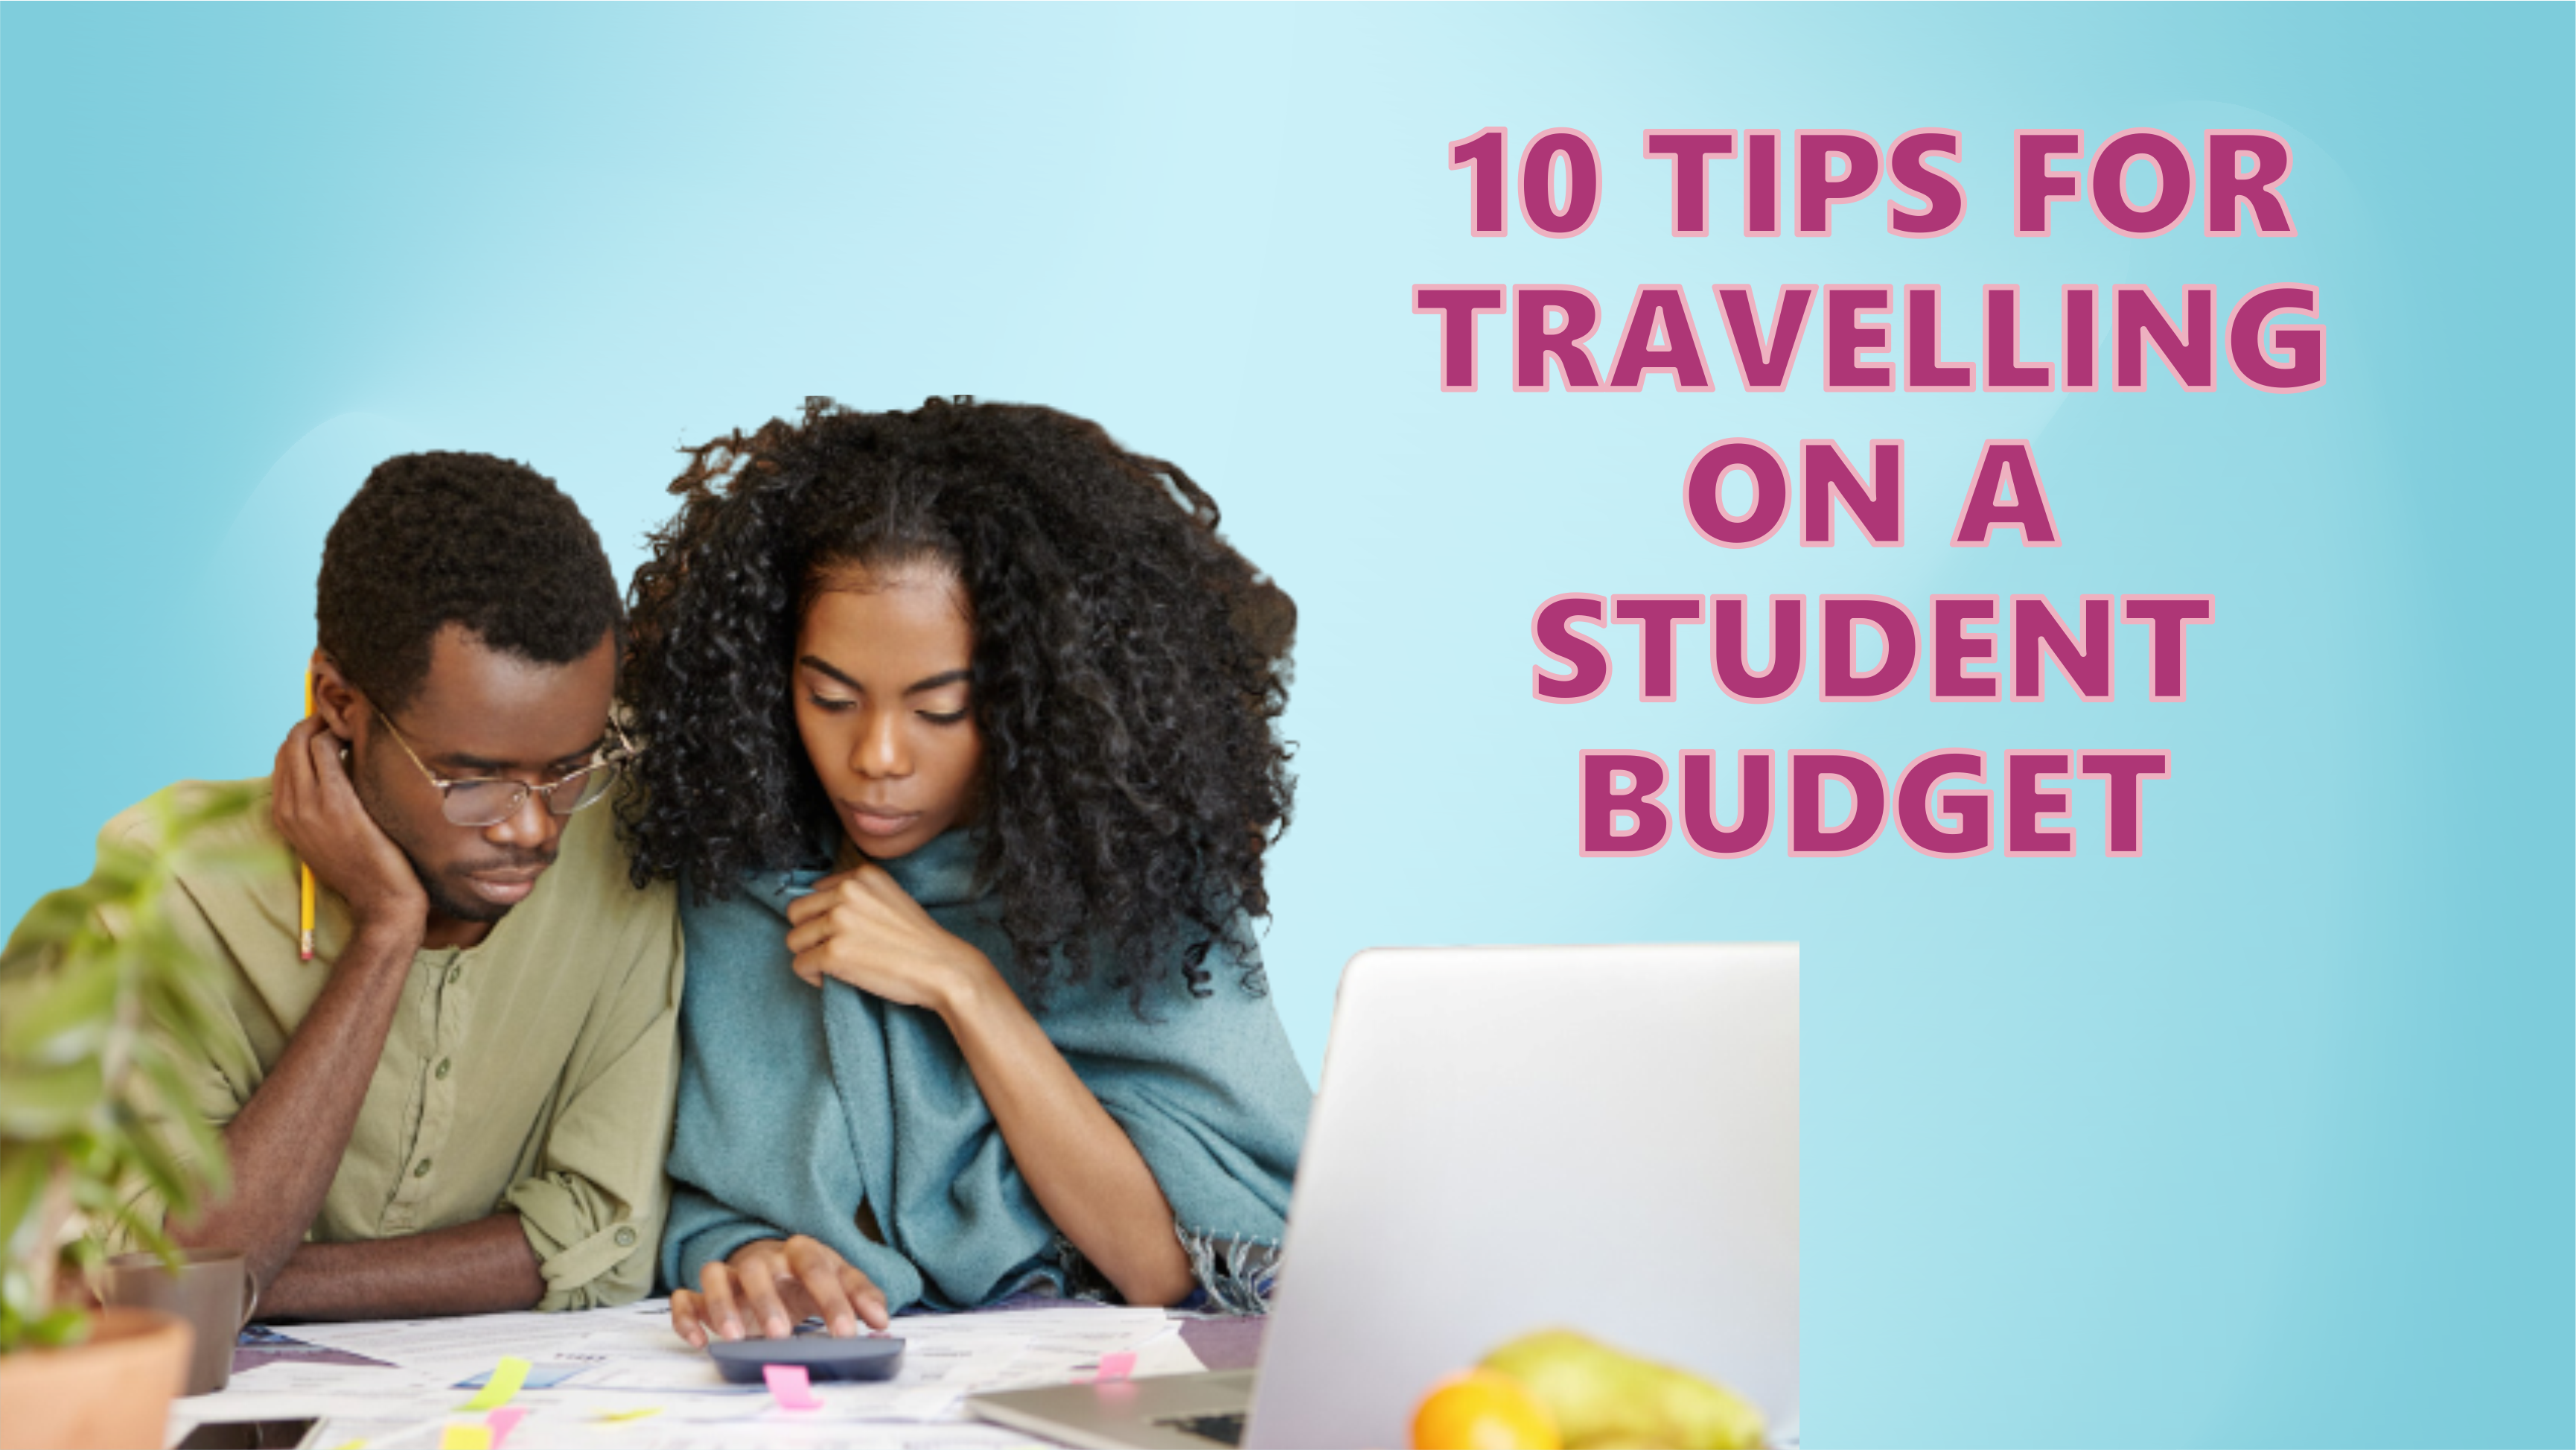 10 tips for traveling on a student budget